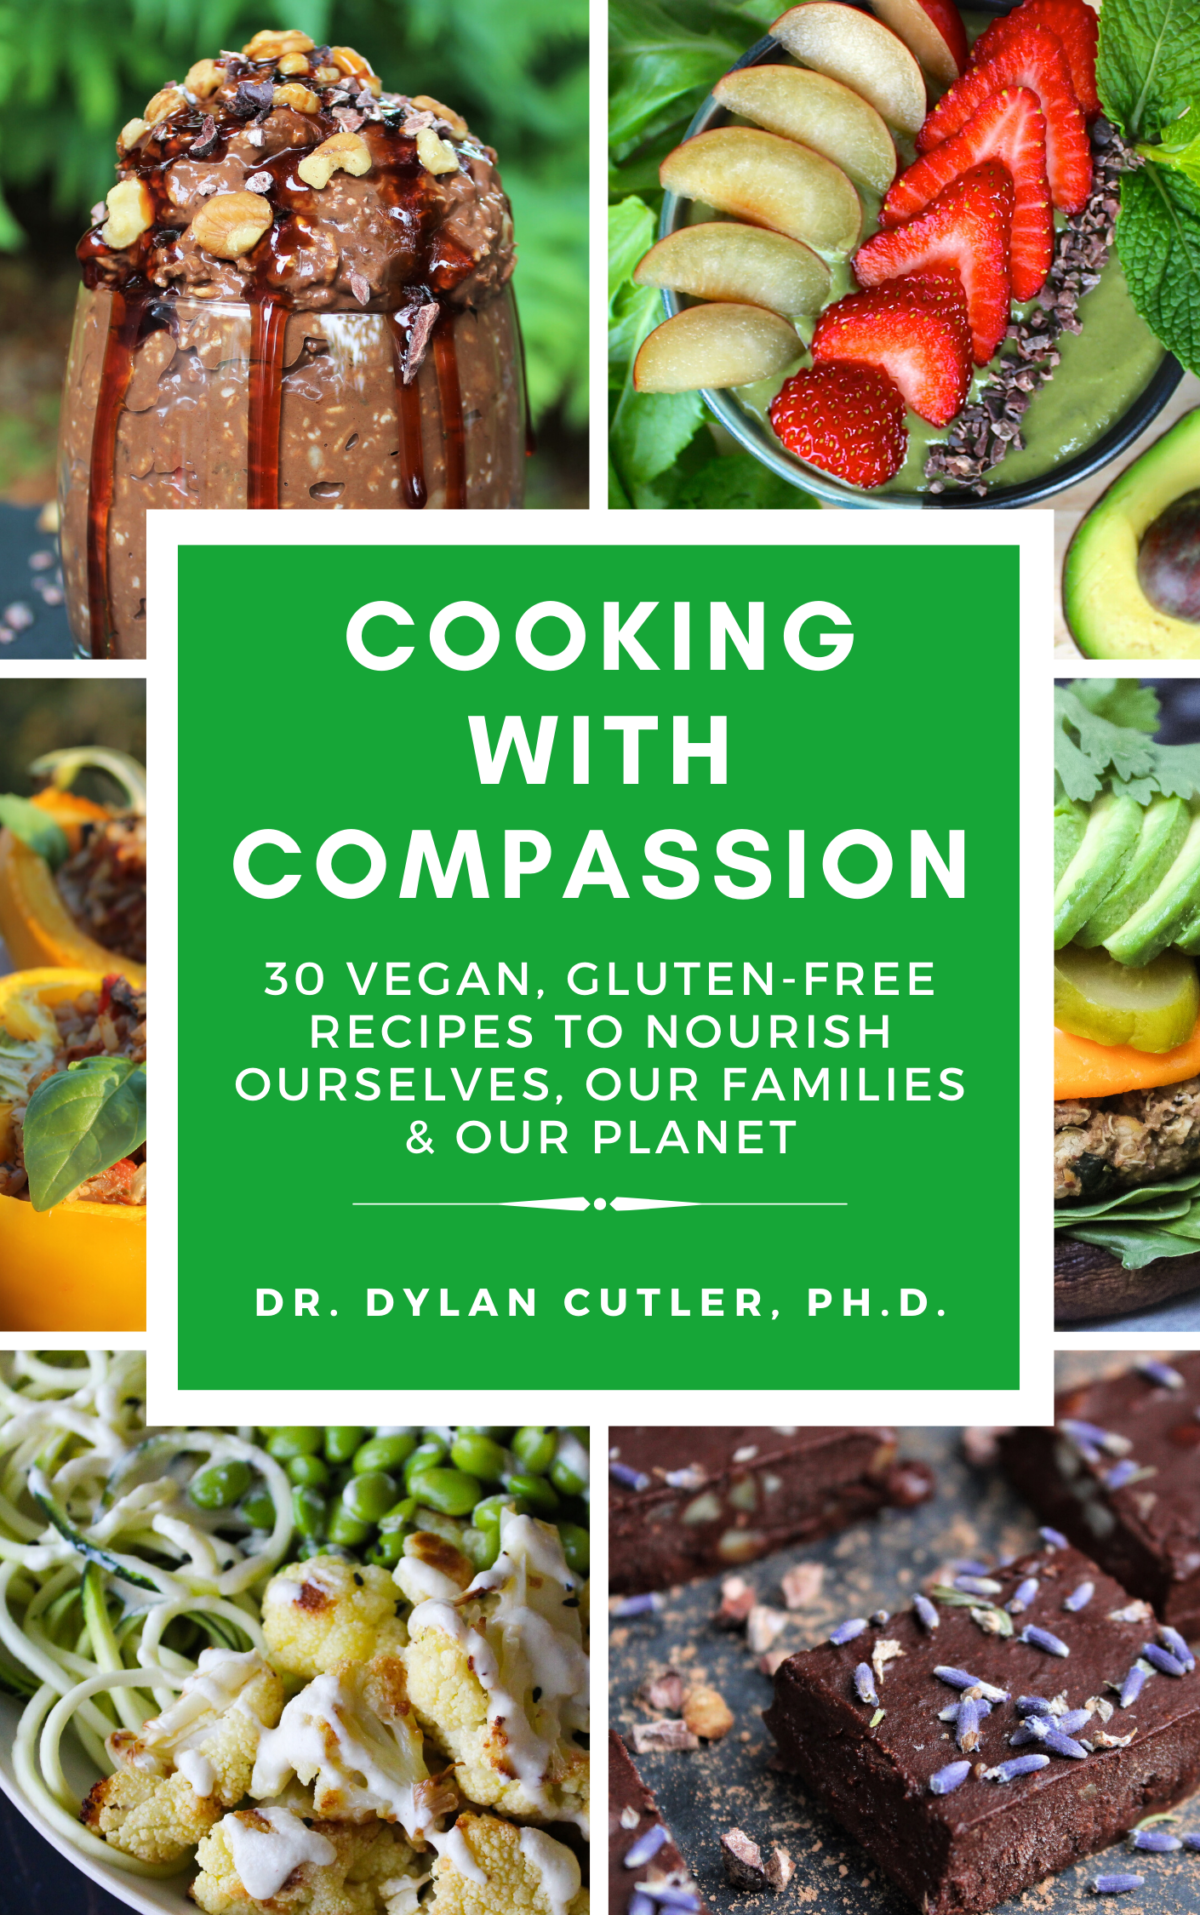 Cooking with Compassion: 30 Vegan, Gluten-Free Recipes by Dr Dylan Cutler